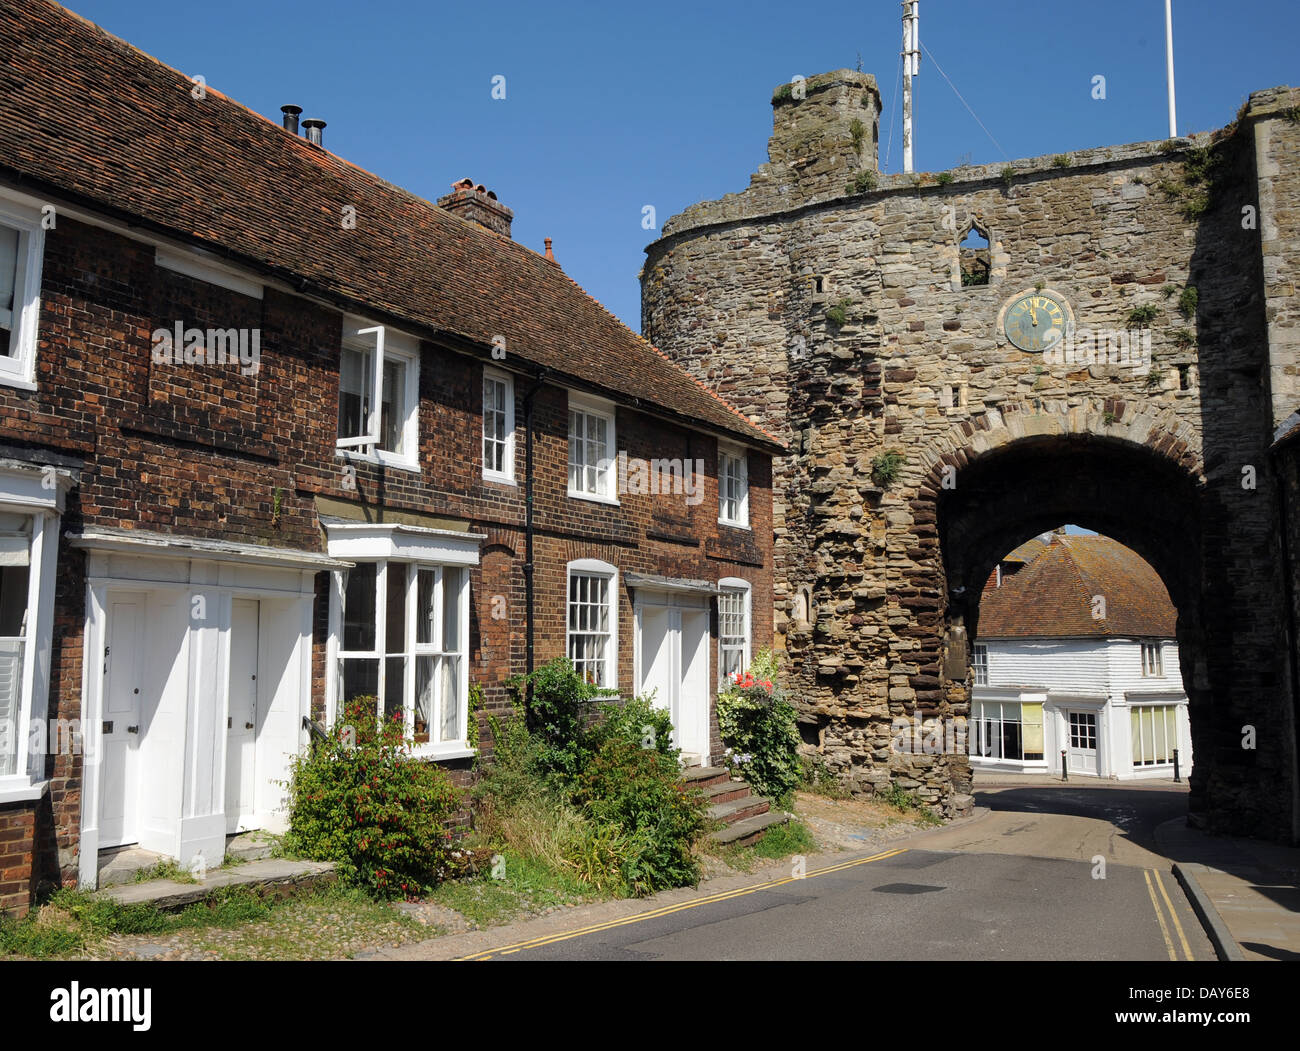 The Landgate in the village of Rye, dating from 1329 during the reign of King Edward III. Stock Photo